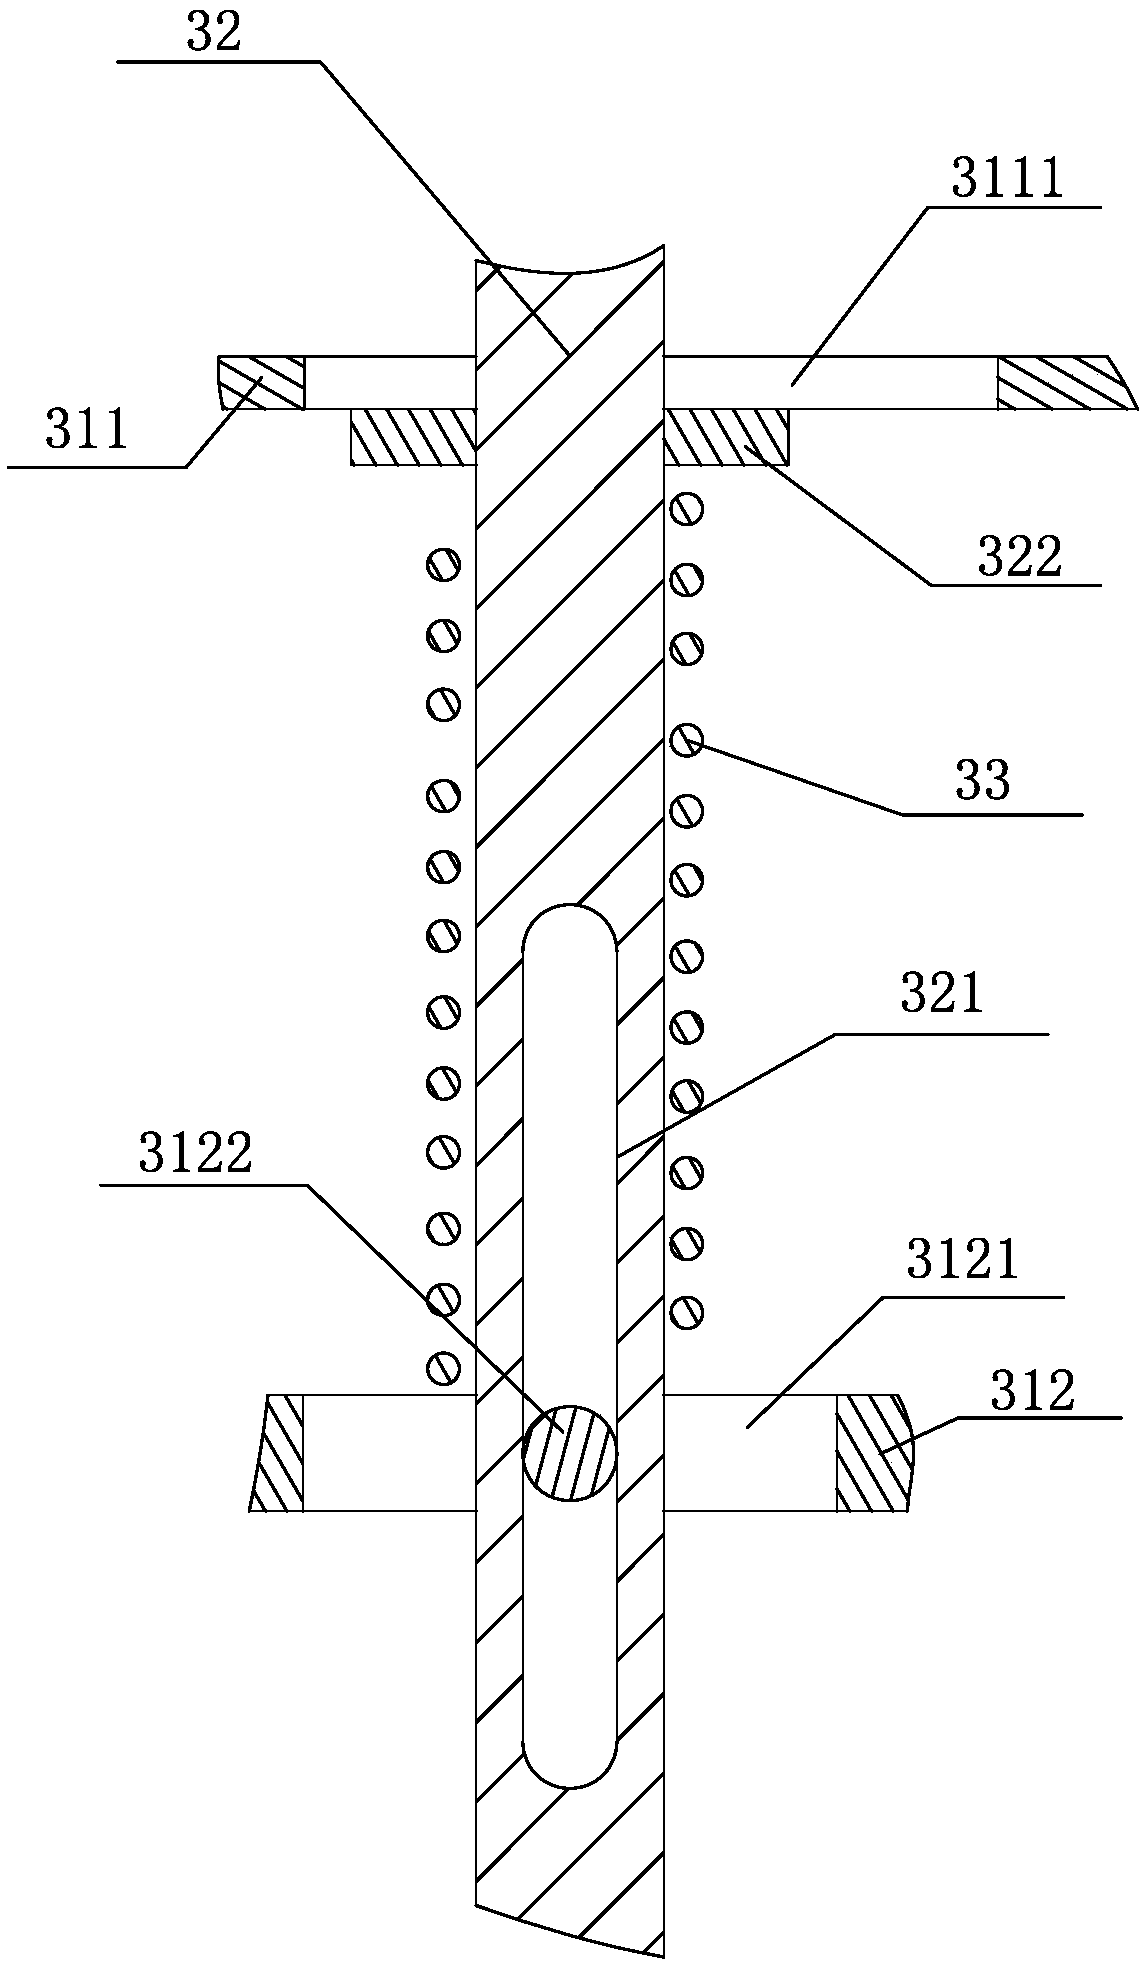 Isolated switch device based on automatic opening and closing function